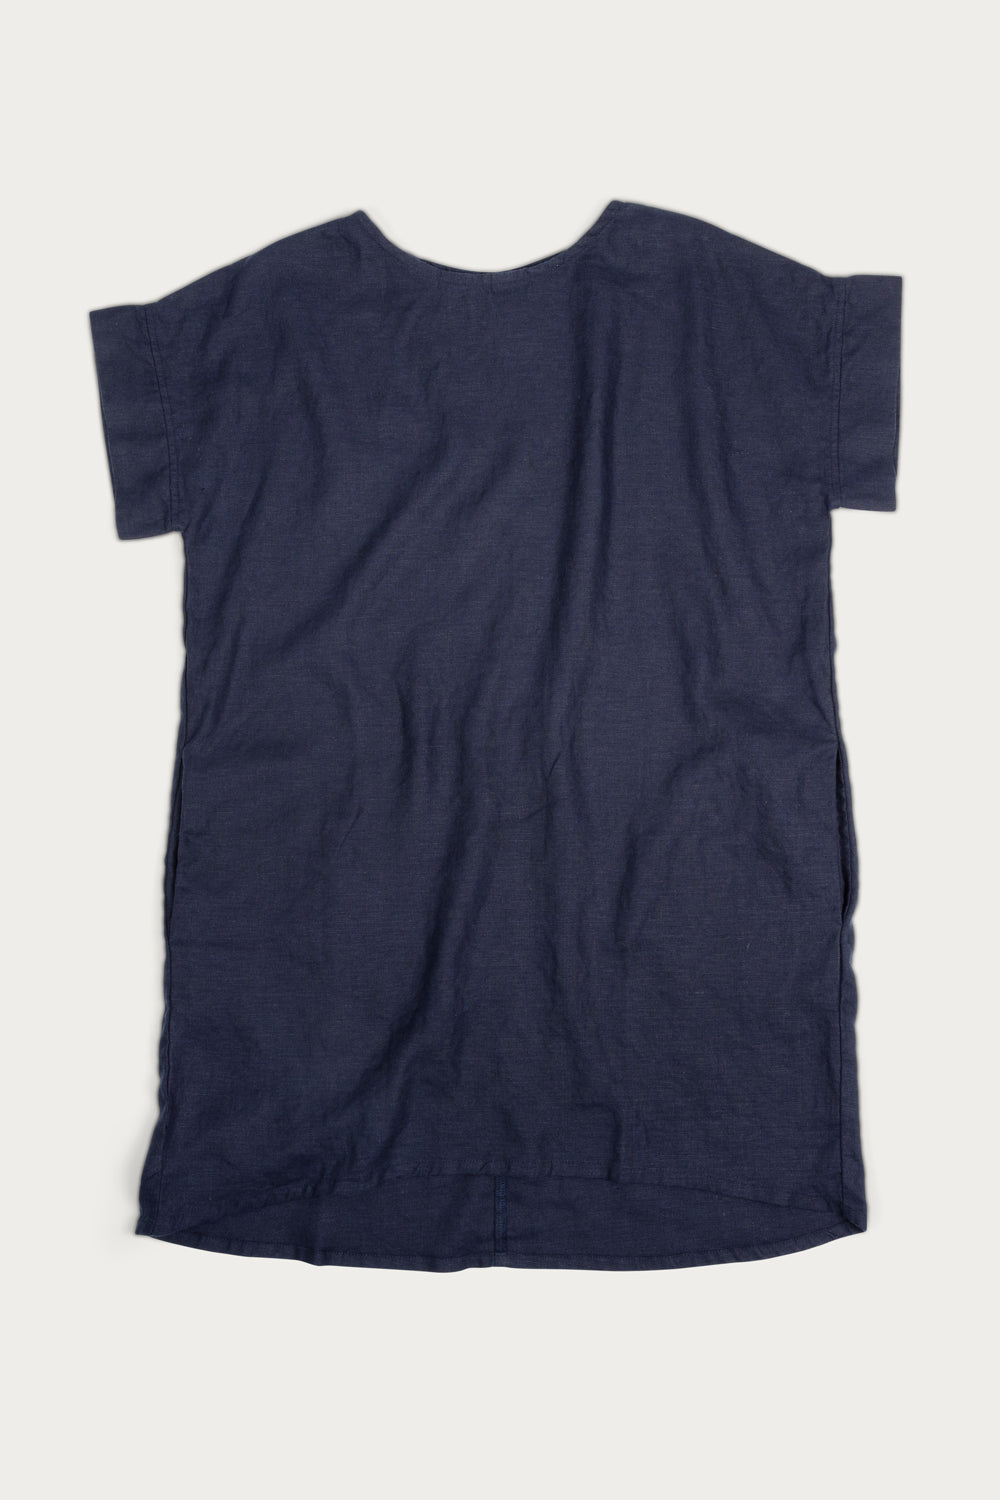 Georgia Dress in Navy Midweight Linen#color_navy